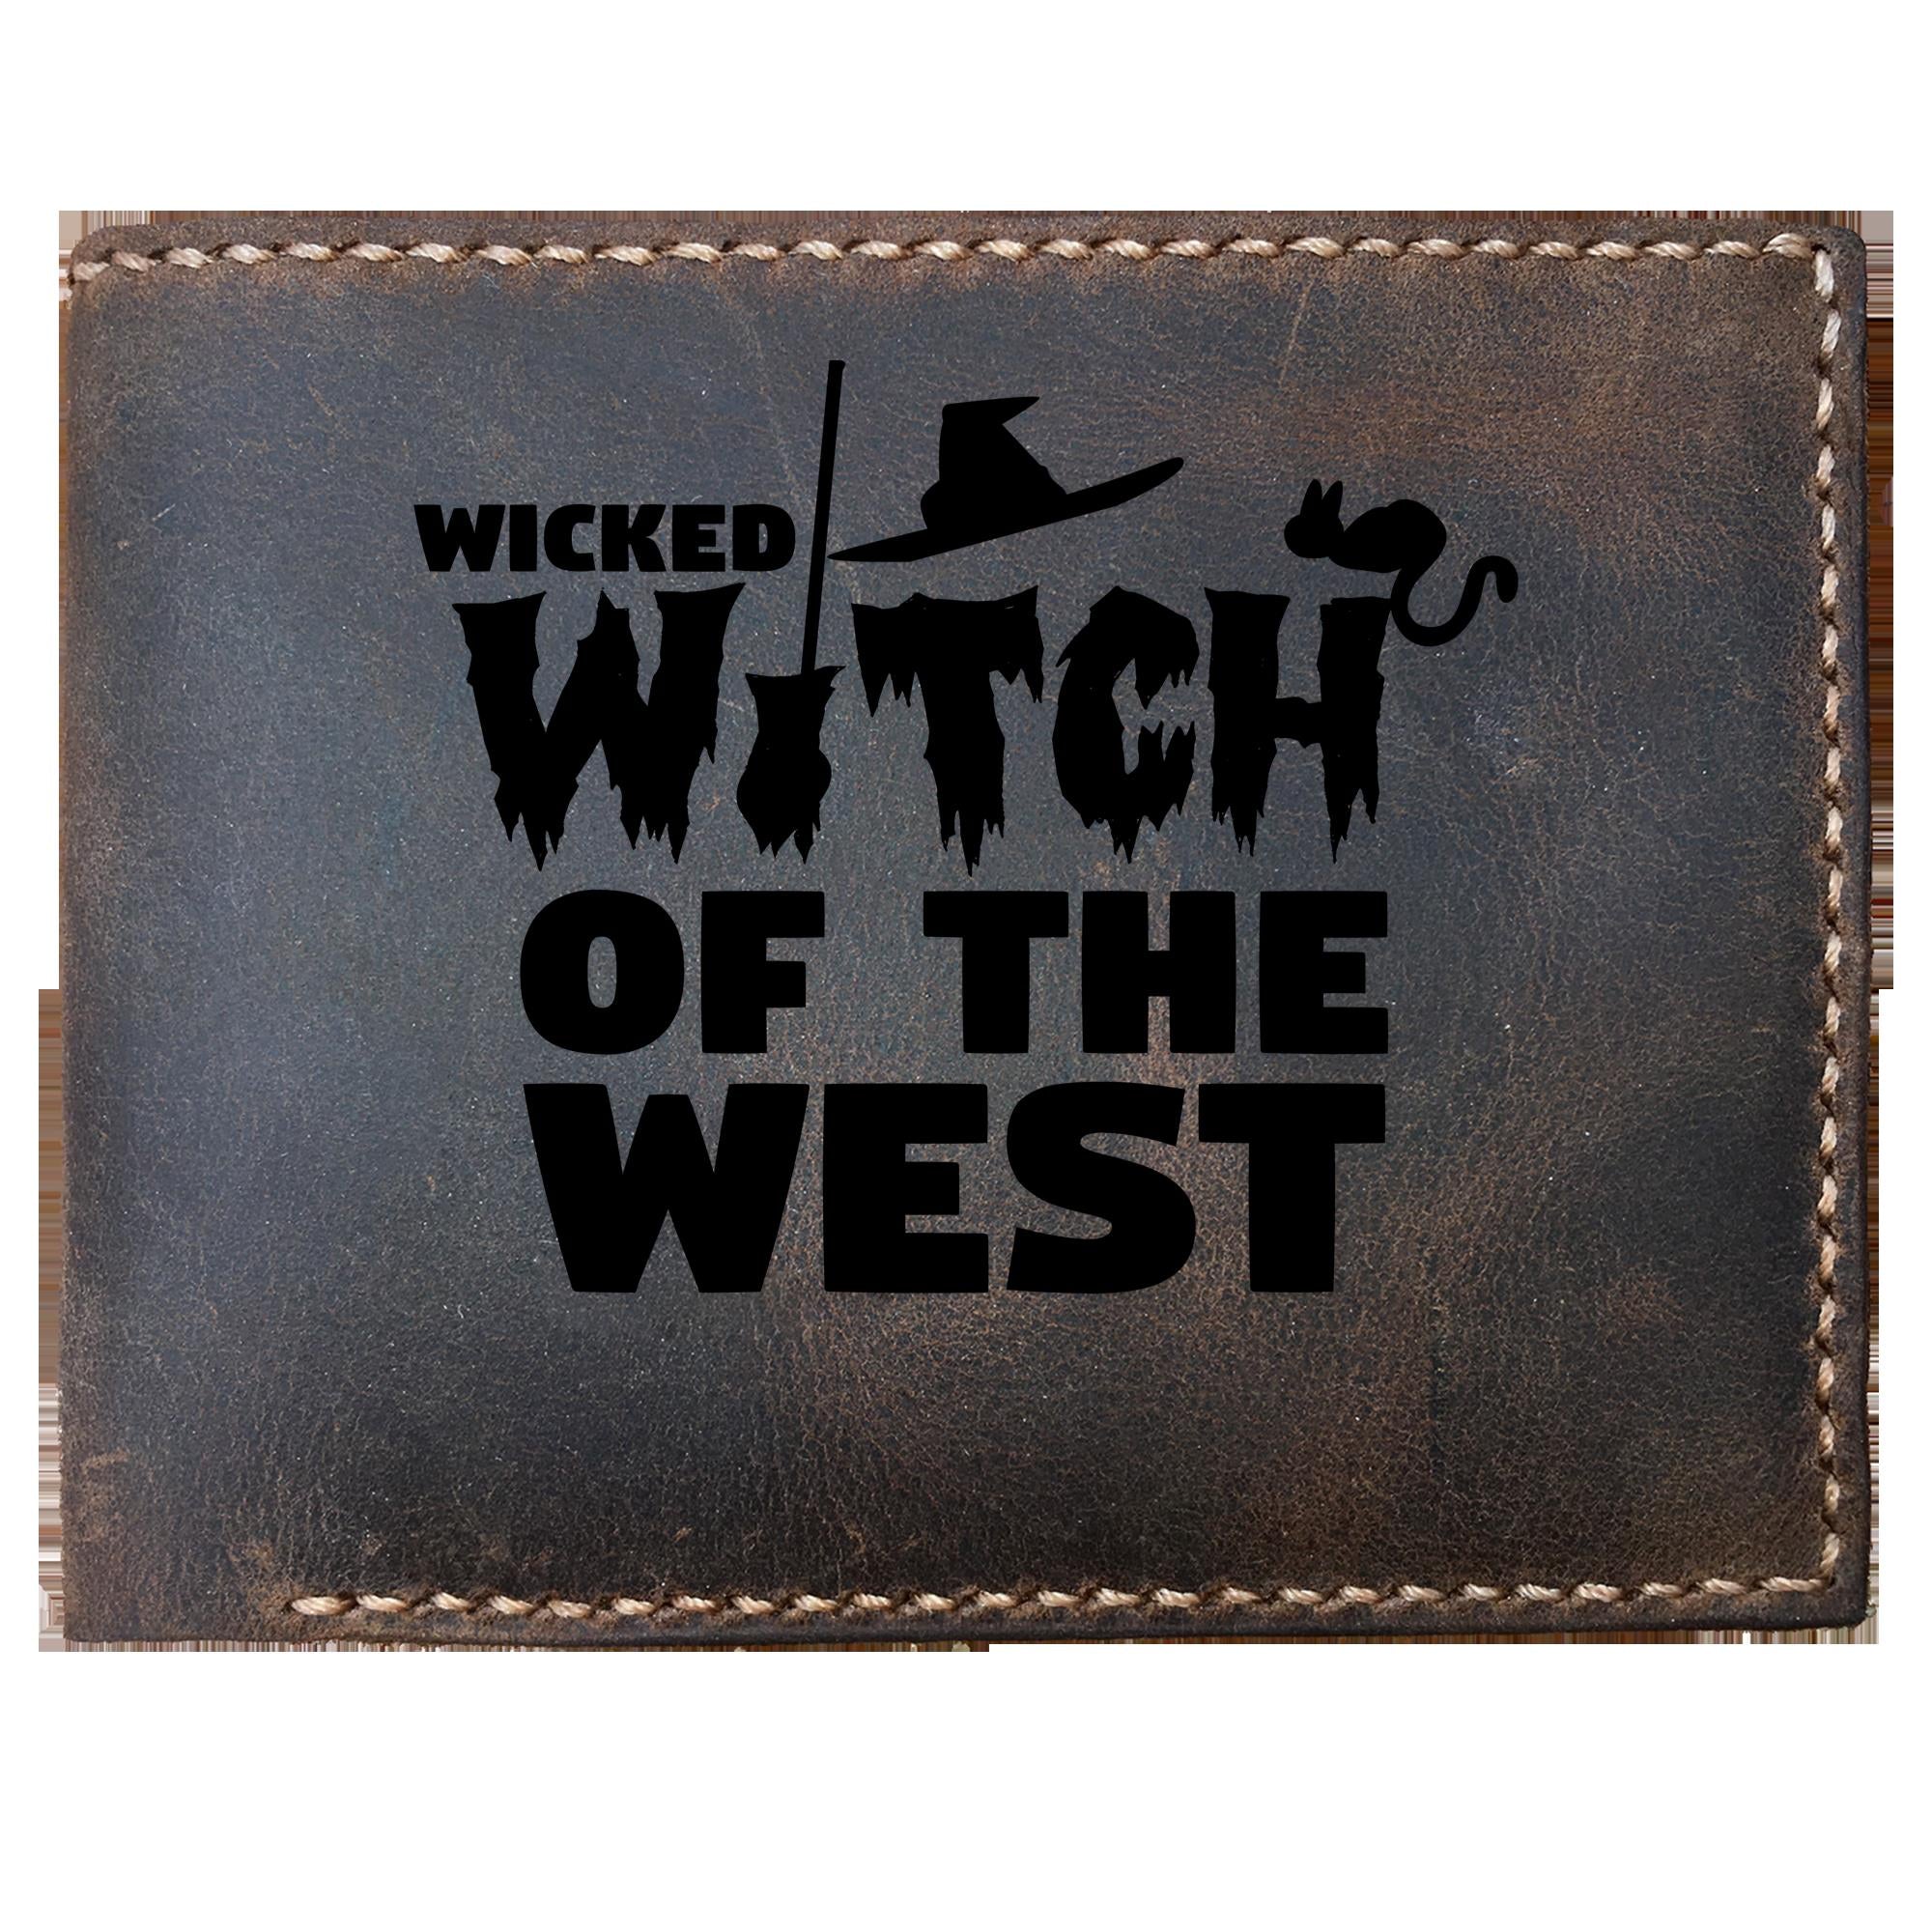 Skitongifts Funny Custom Laser Engraved Bifold Leather Wallet For Men, Wicked Witch Of The West Halloween Costume